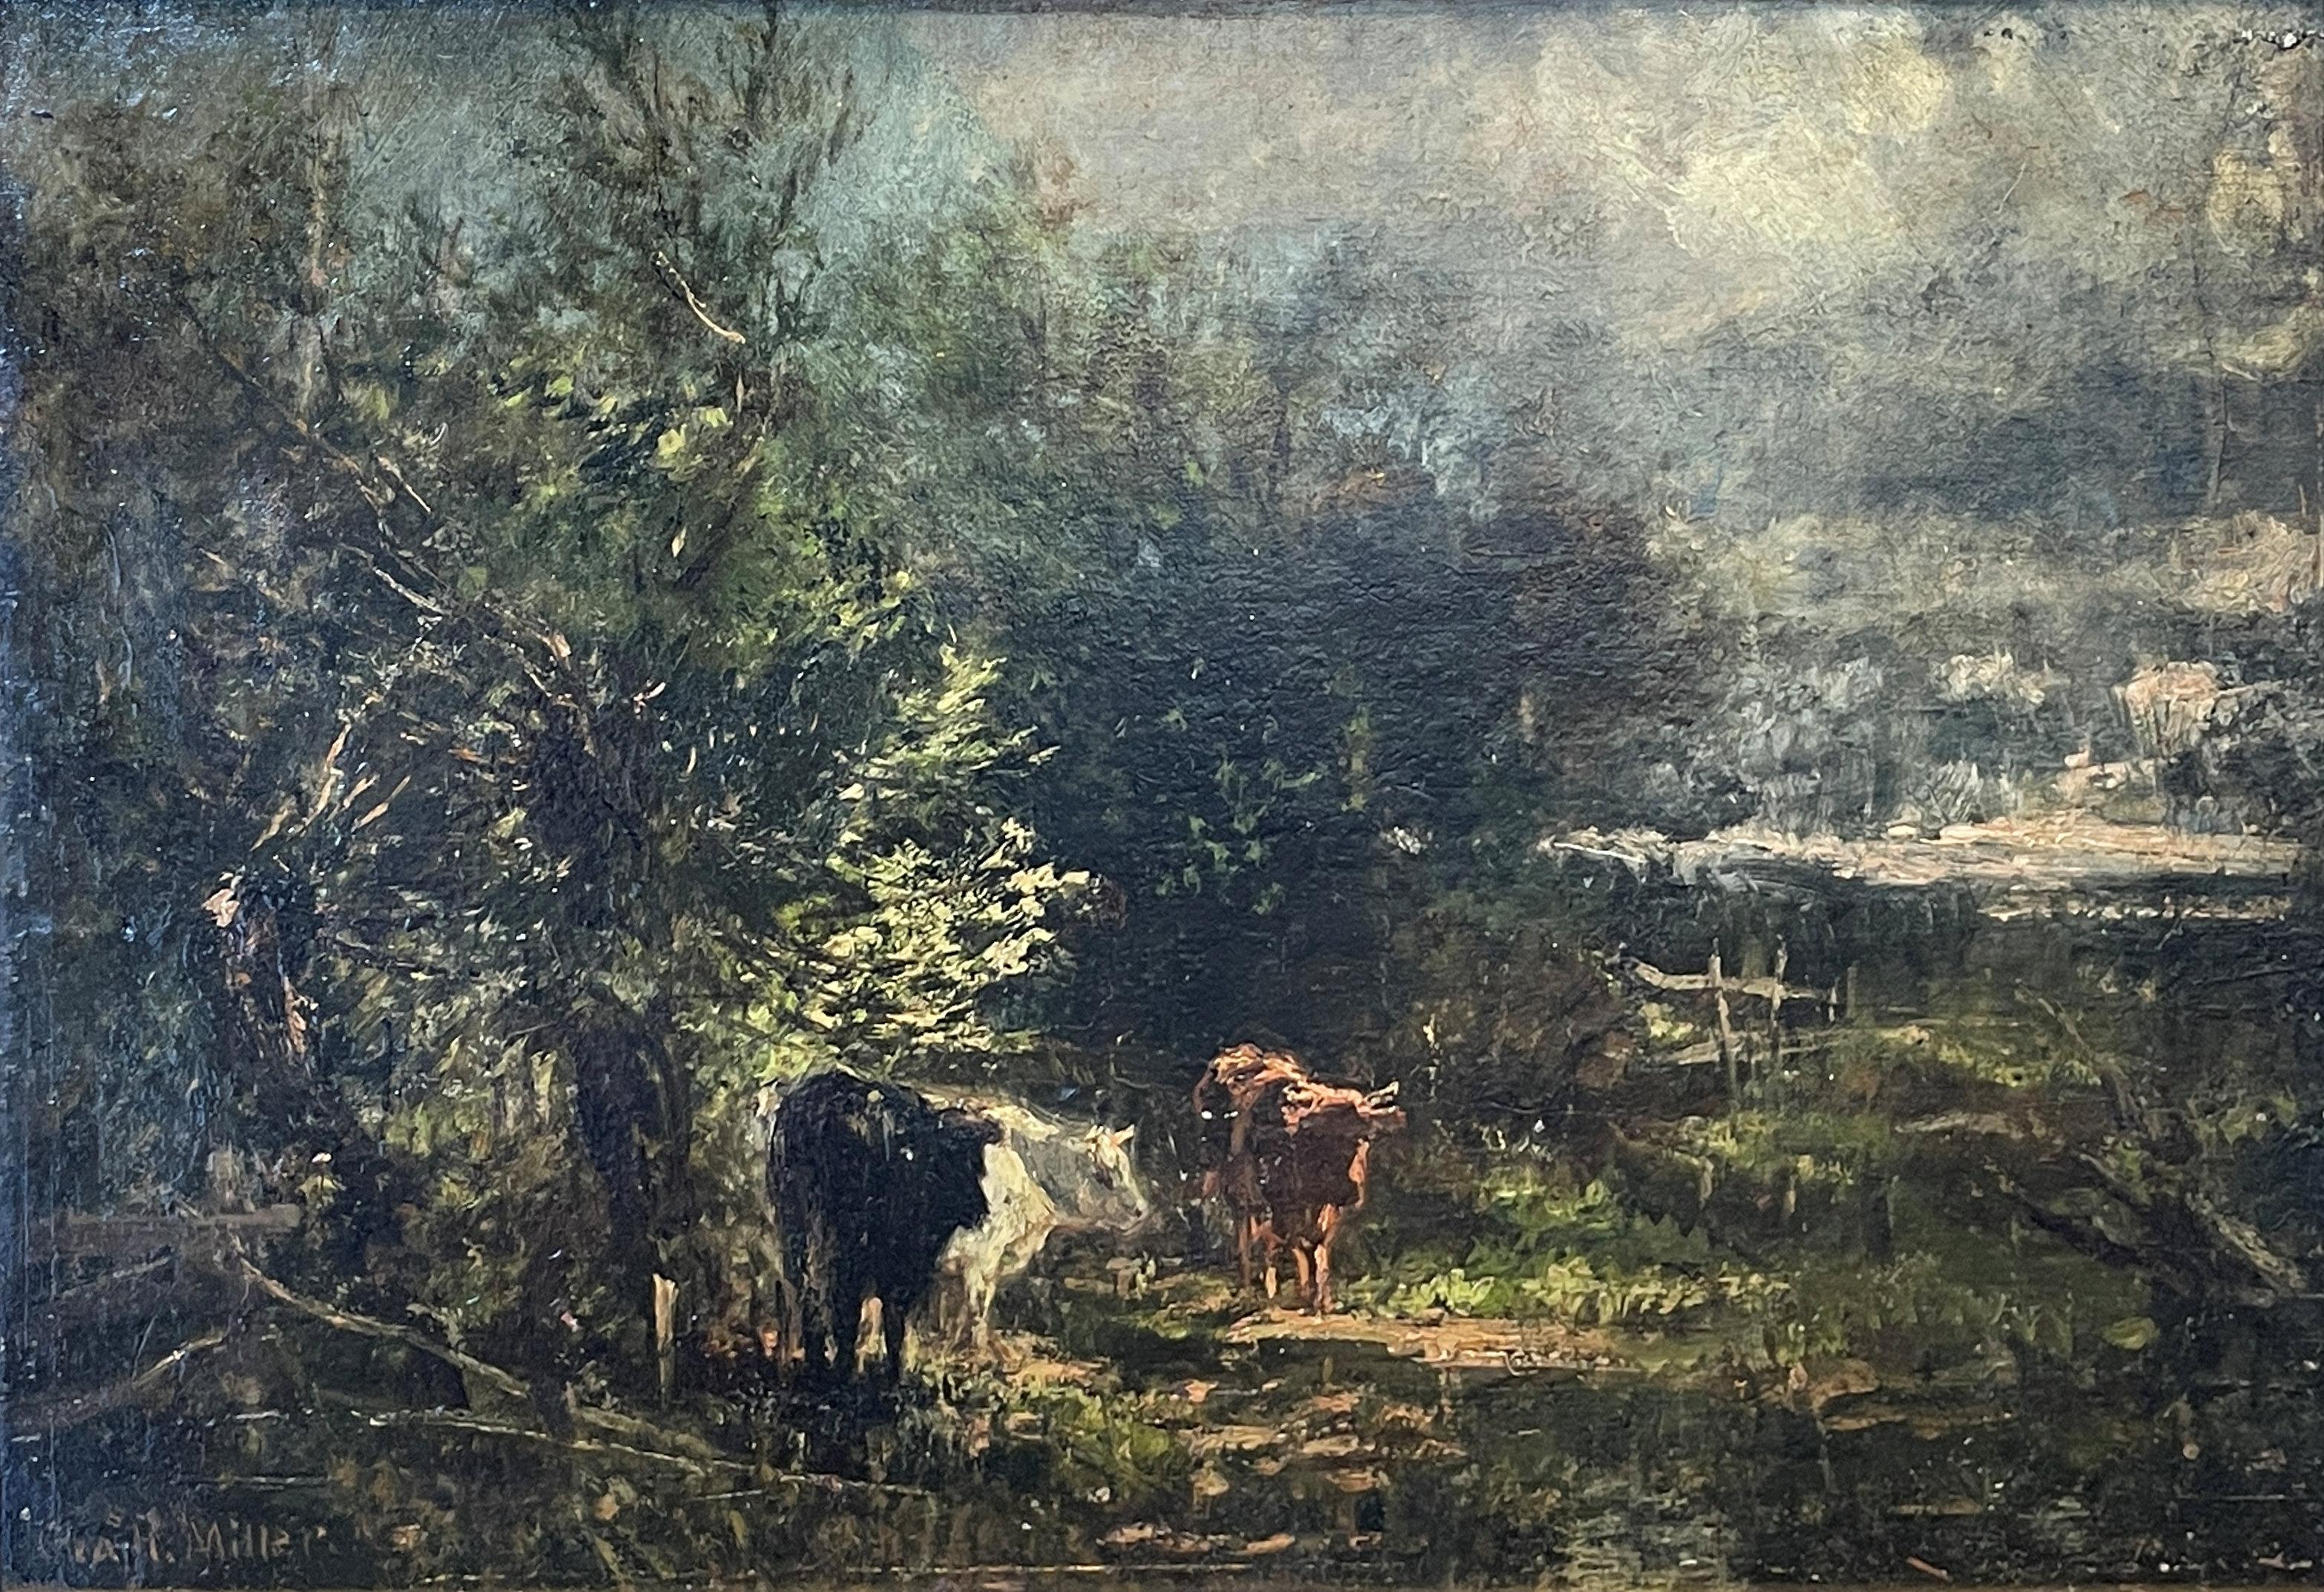 Charles Henry Miller
Flushing Landscape with Cows, circa 1880
Signed lower left
Oil on canvas
13 x 19 inches

Charles Henry Miller was a noted artist and painter of landscapes from Long Island, New York. The American poet Bayard Taylor called him,